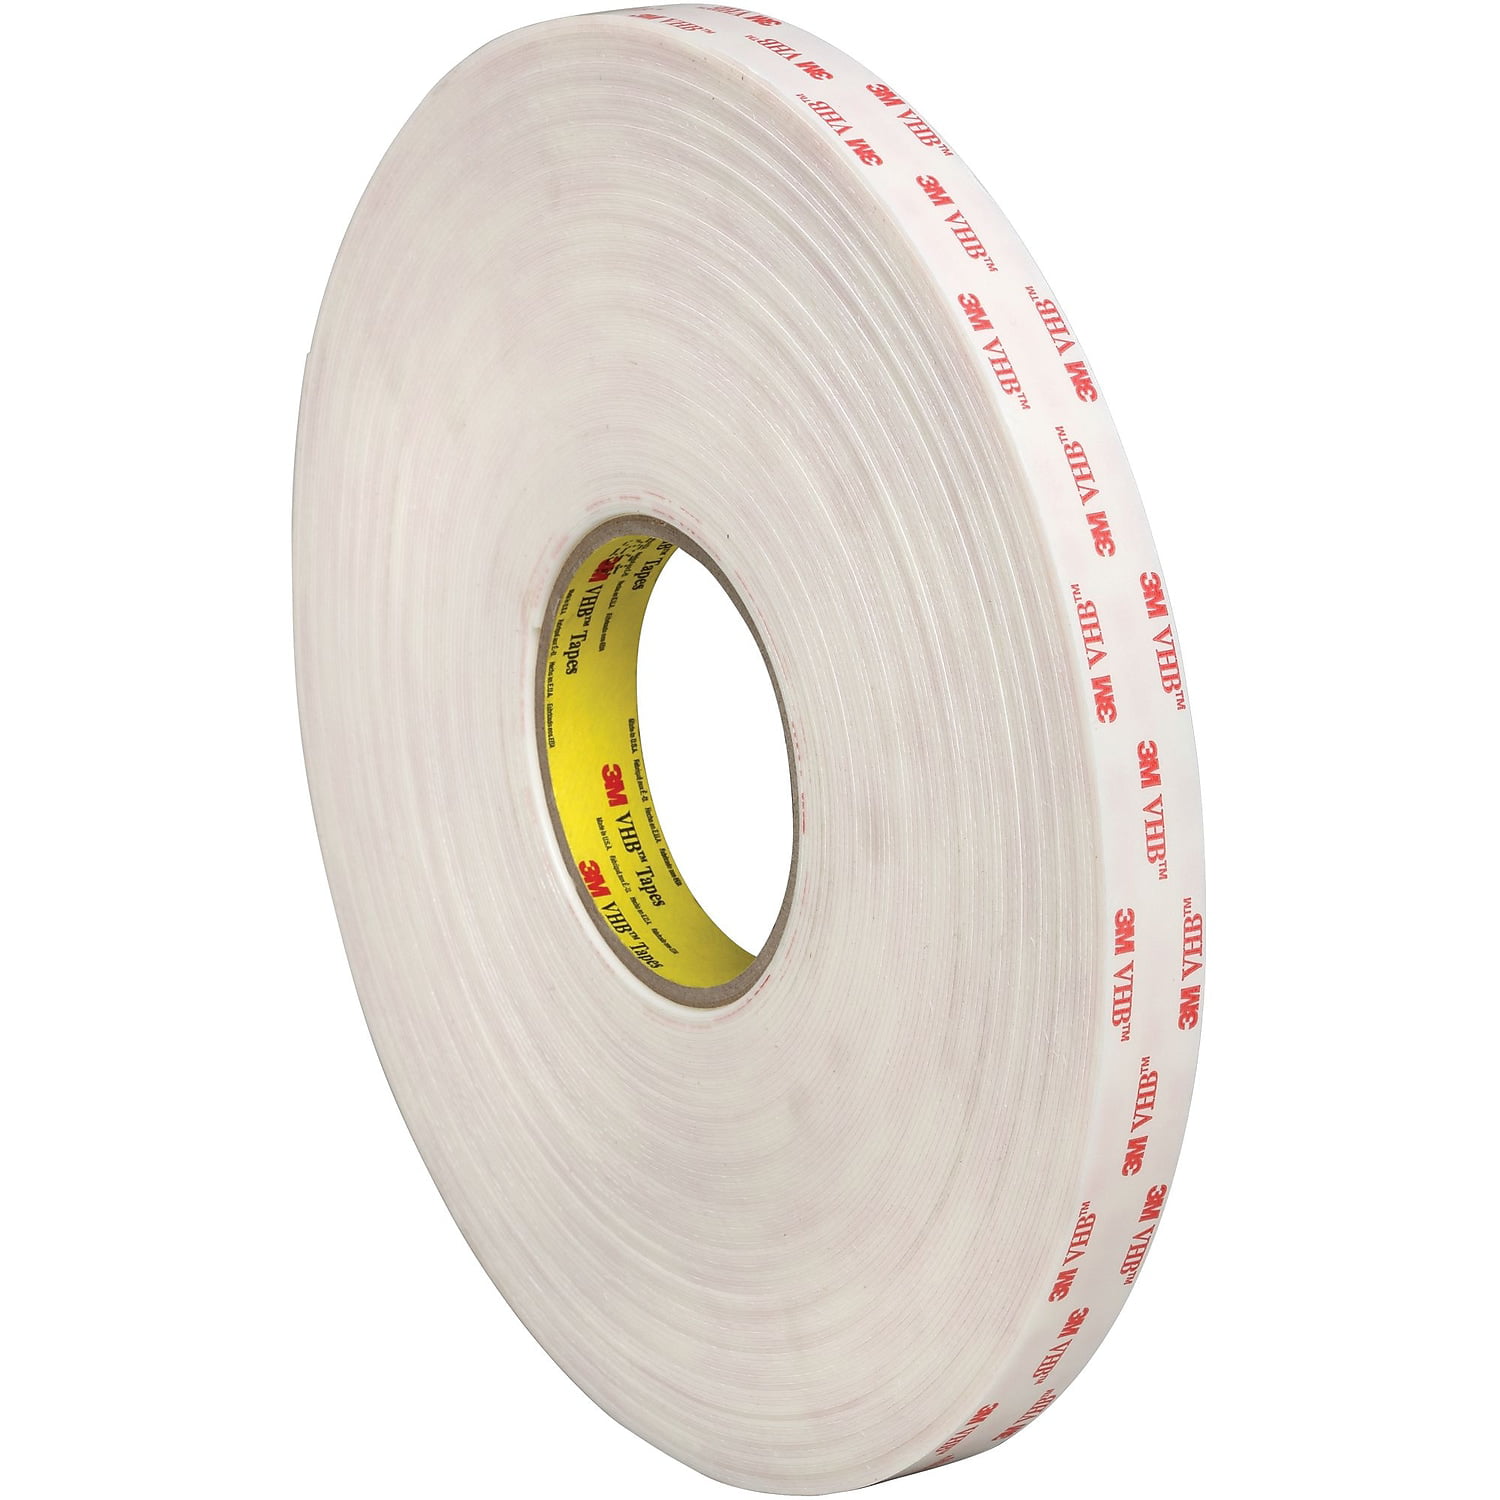 494534r 0.75 In. X 5 Yards White 3m 4945 Tape